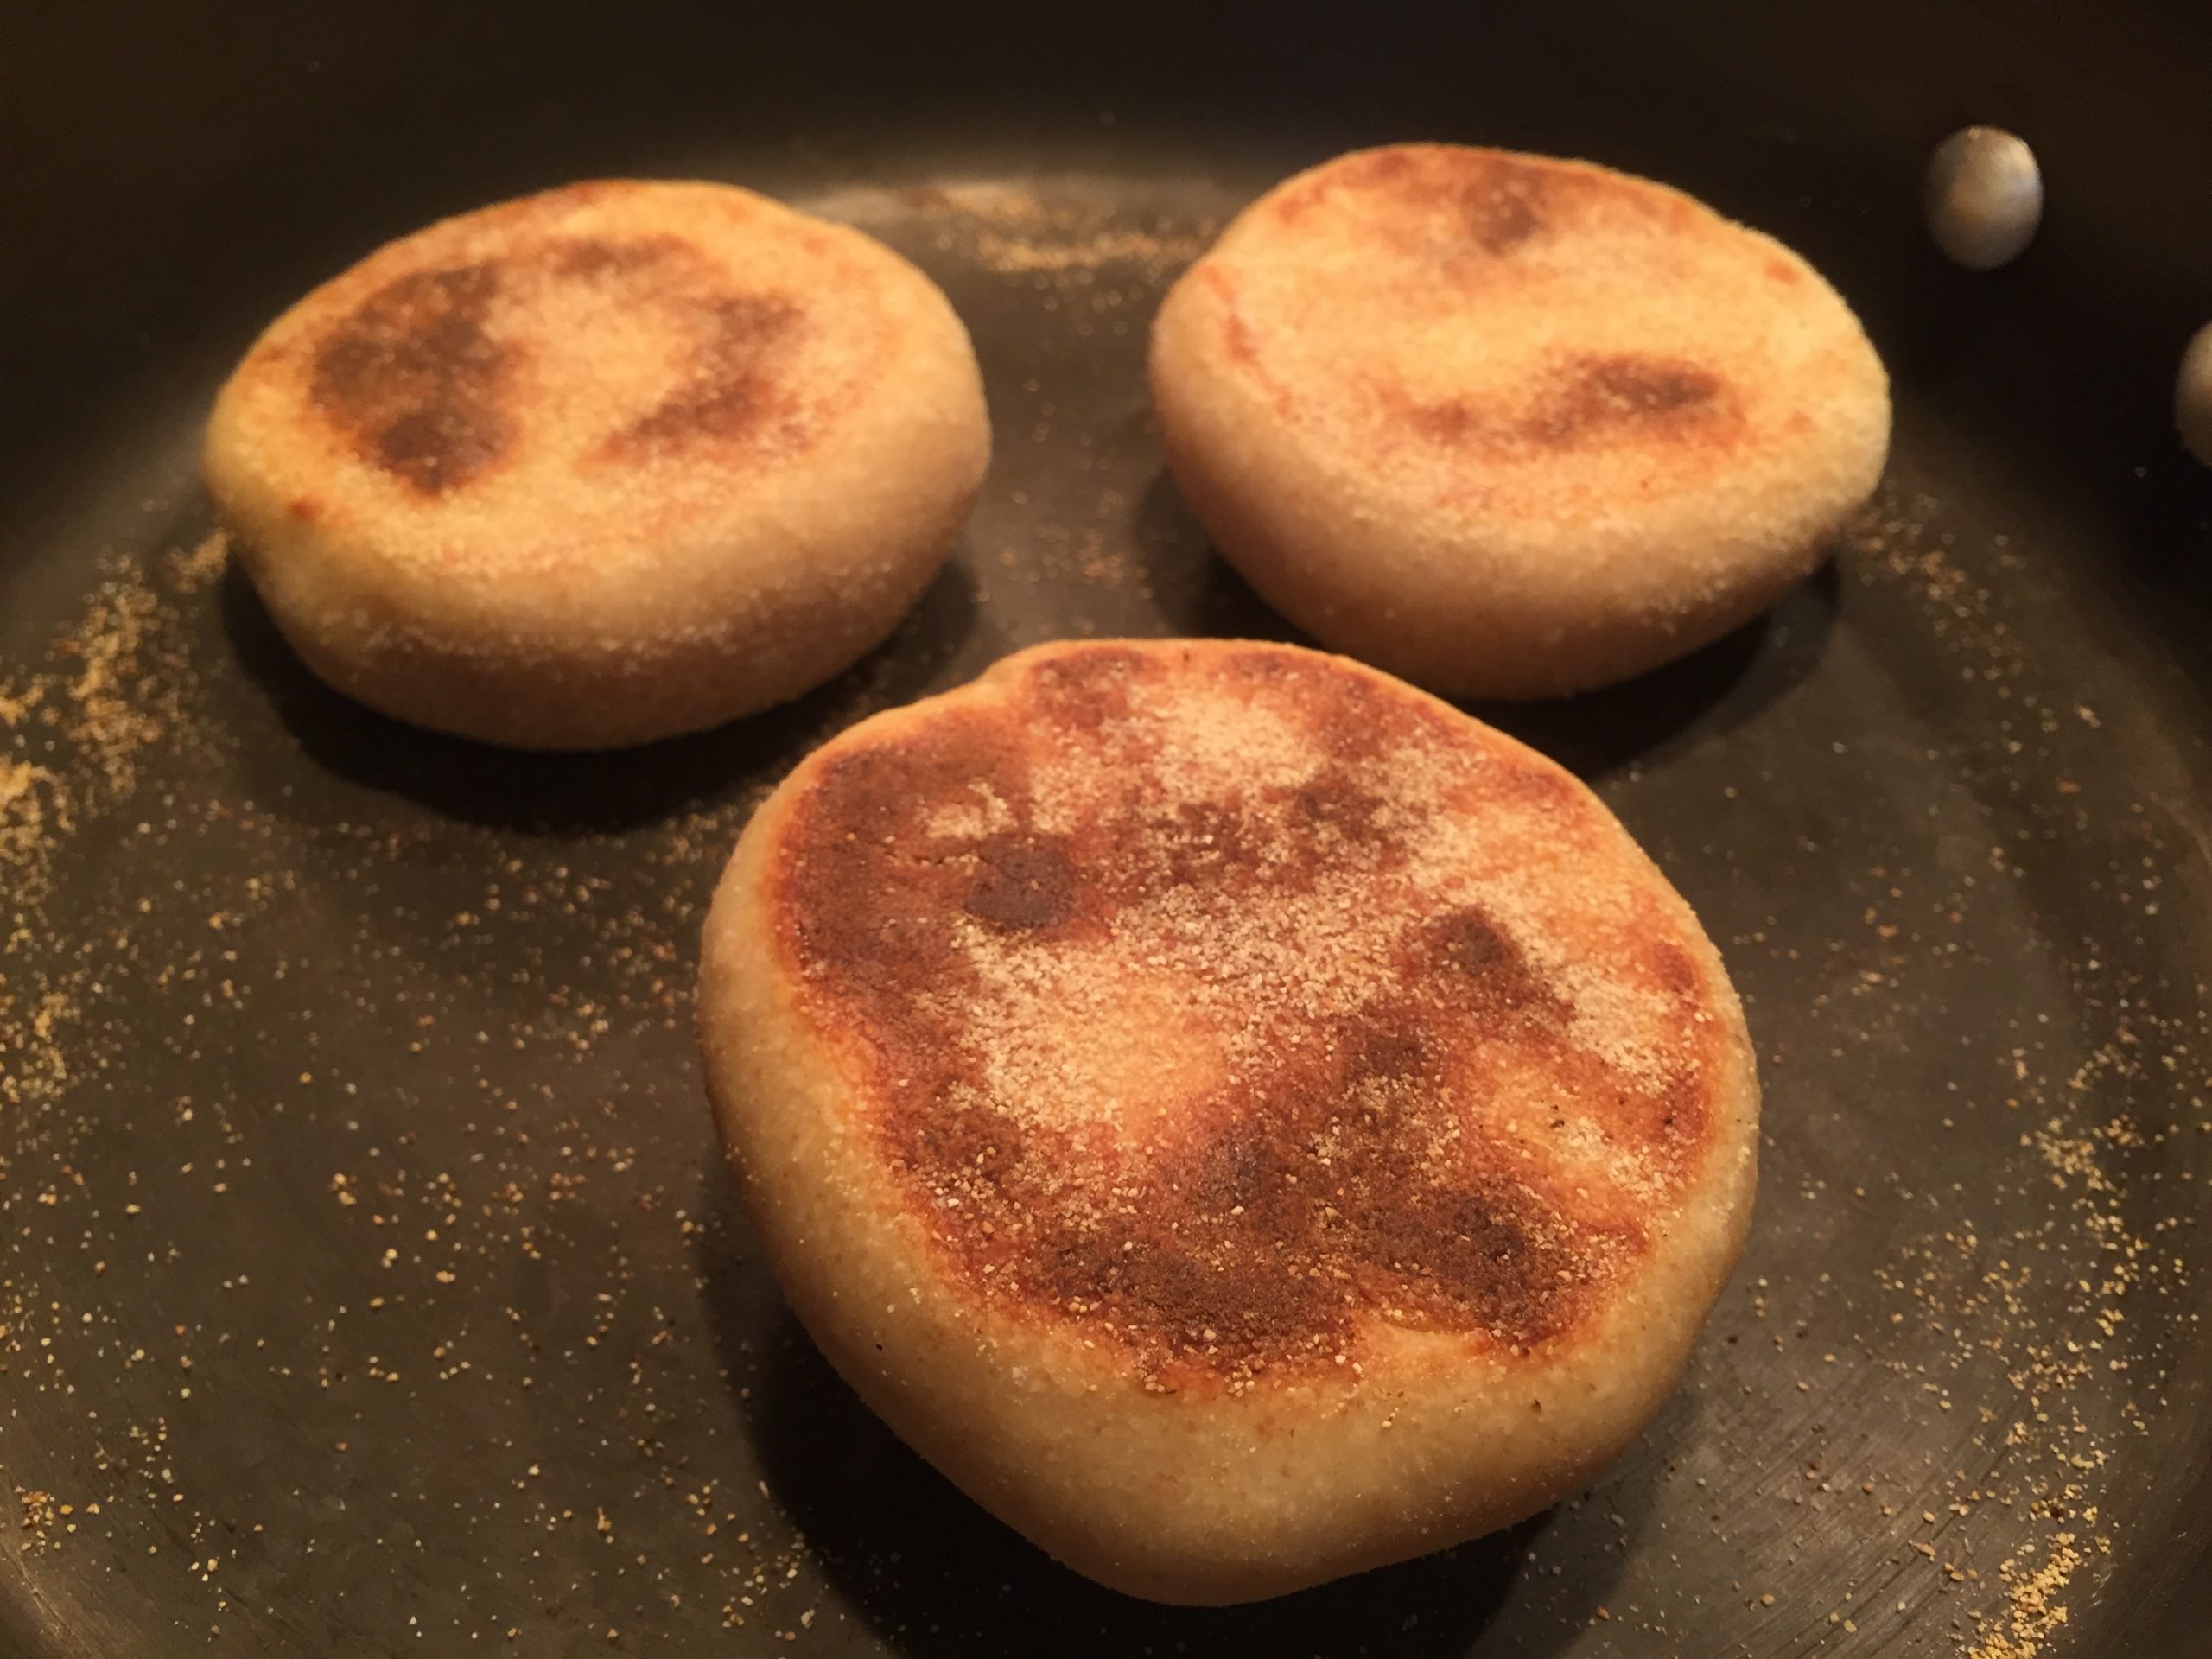 English muffins after being flipped